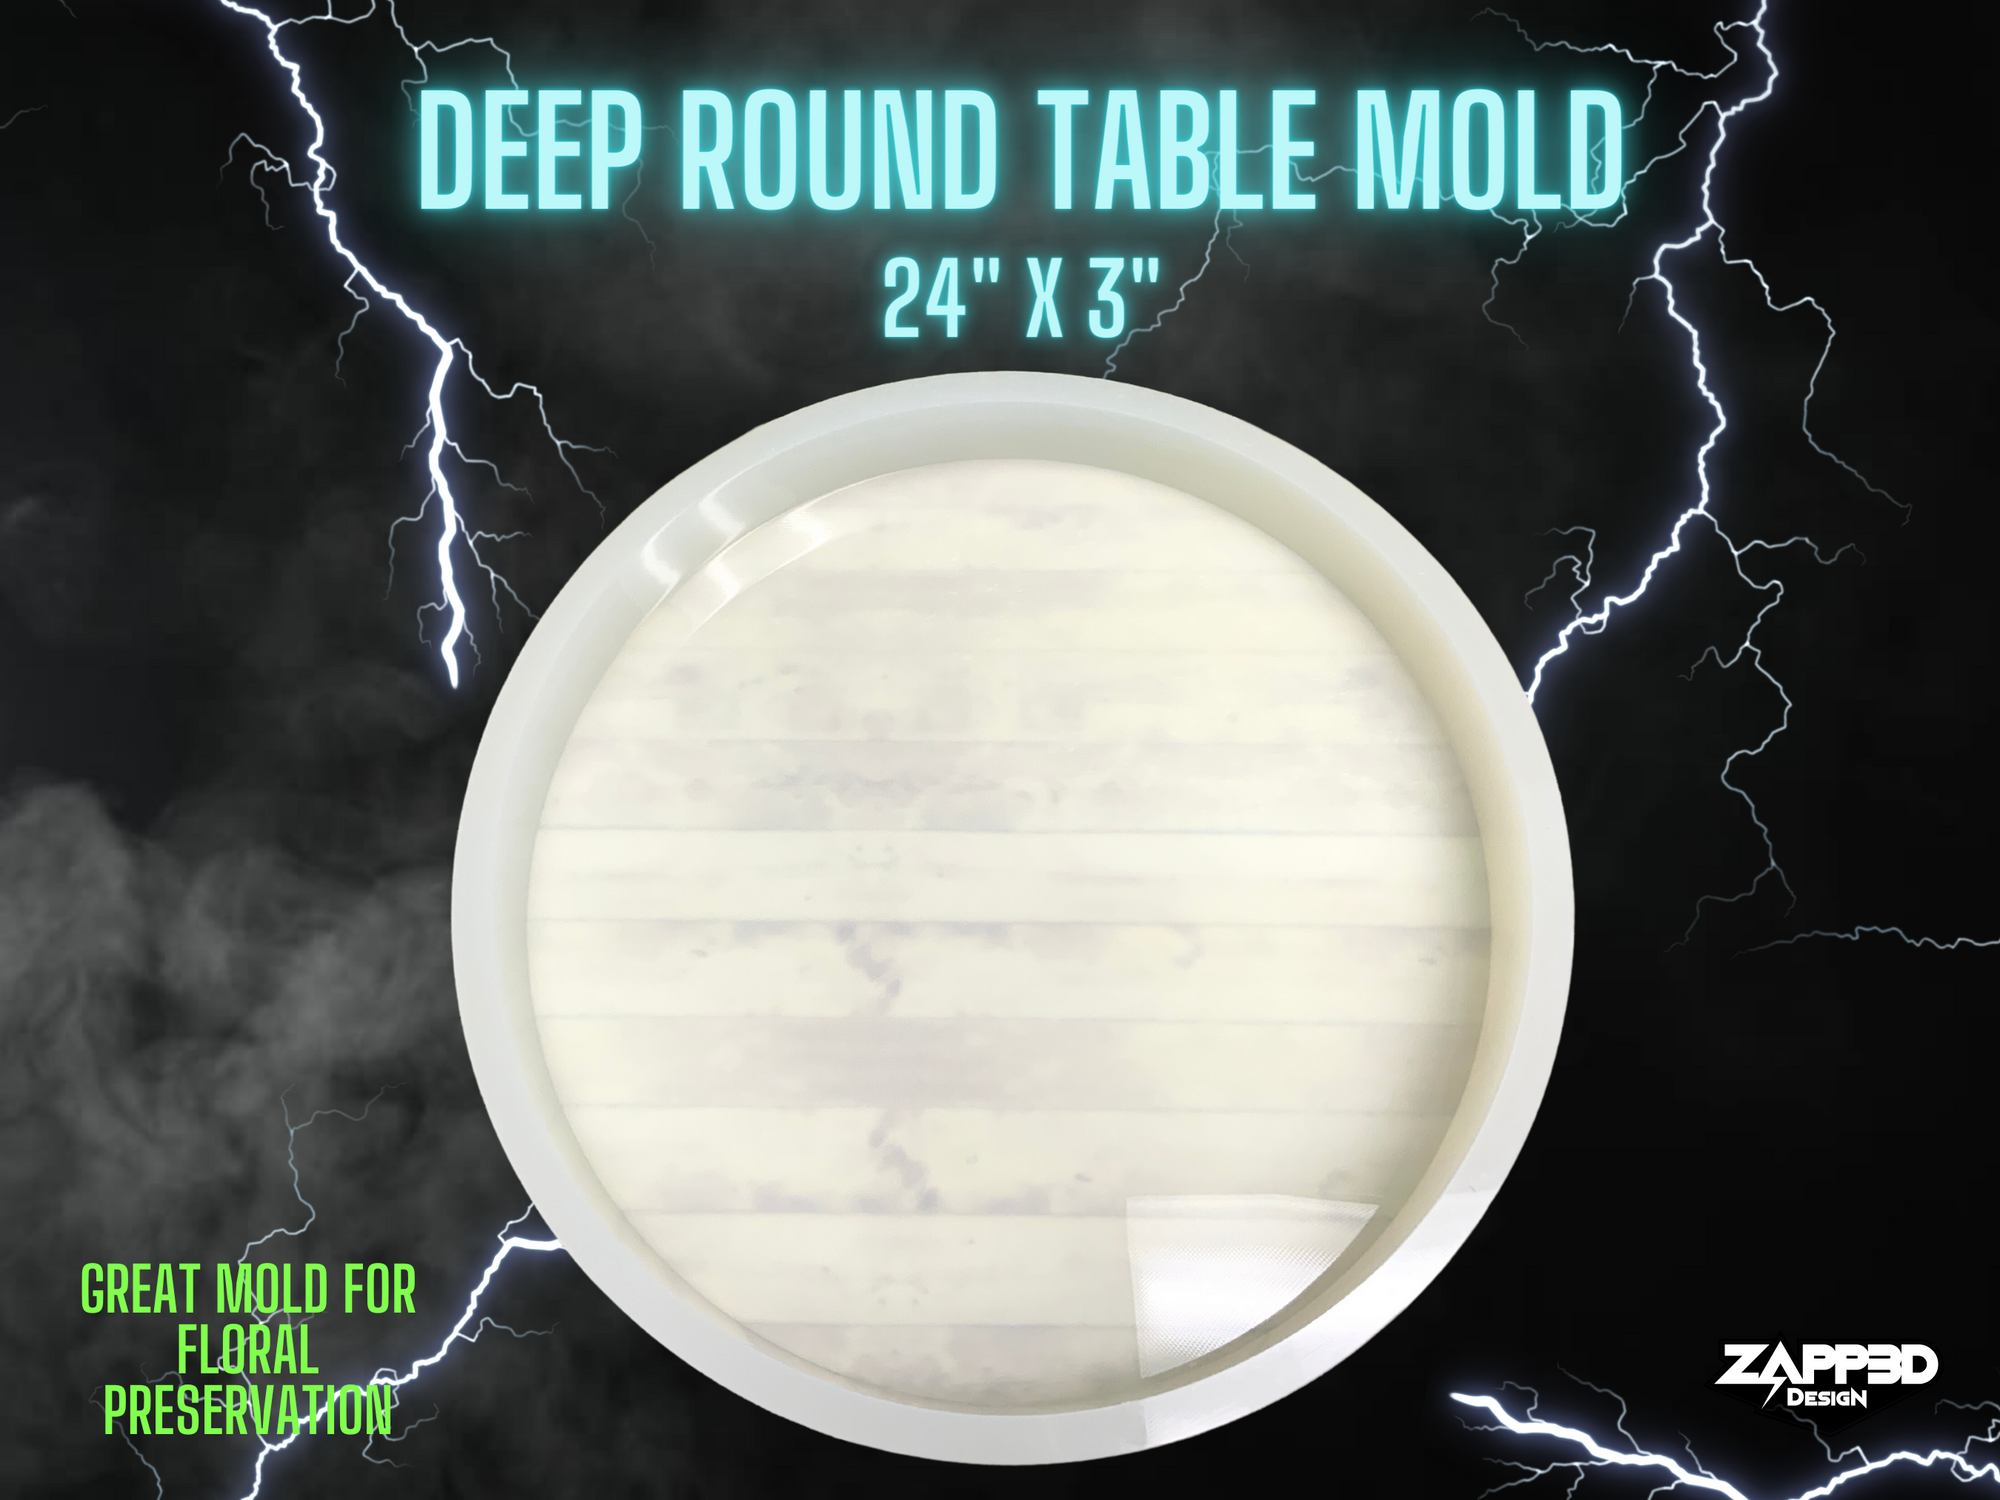 Deep Round Table Mold | 24" x 3" | ULTRA QUALITY | Table Mold, Deep Silicone Mold, Floral Preservation Mold, Deep Circle Mold, 24" Round Mold